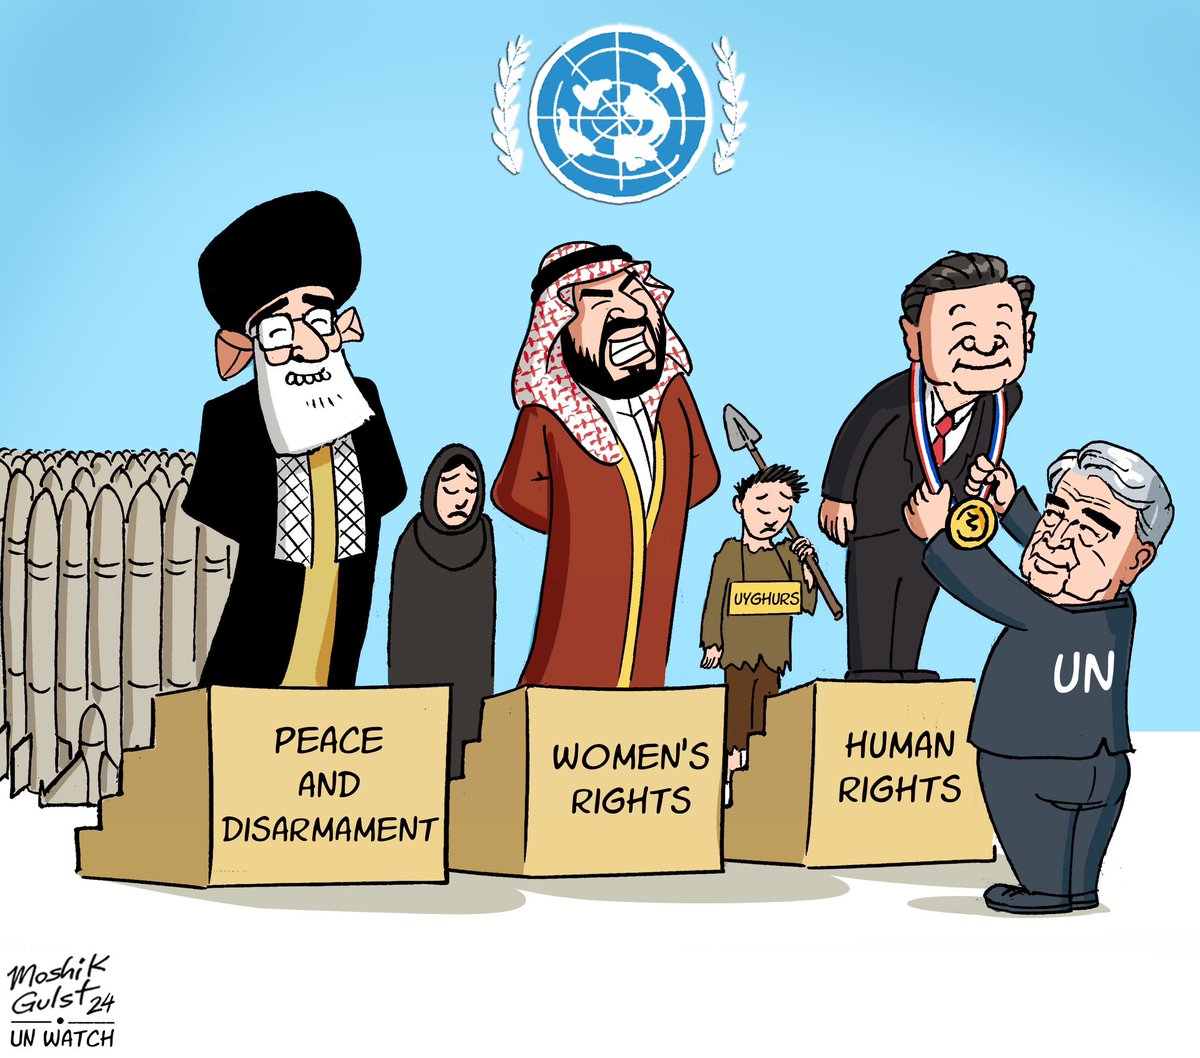 Champions of the UN in 2024: 🇨🇳 China sits on the UN Human Rights Council 🇸🇦 Saudi Arabia chairs the UN Women's Rights Commission 🇮🇷 Islamic Republic of Iran chairs the UN Disarmament Commission Latest @UNWatch cartoon by Moshik Gulst